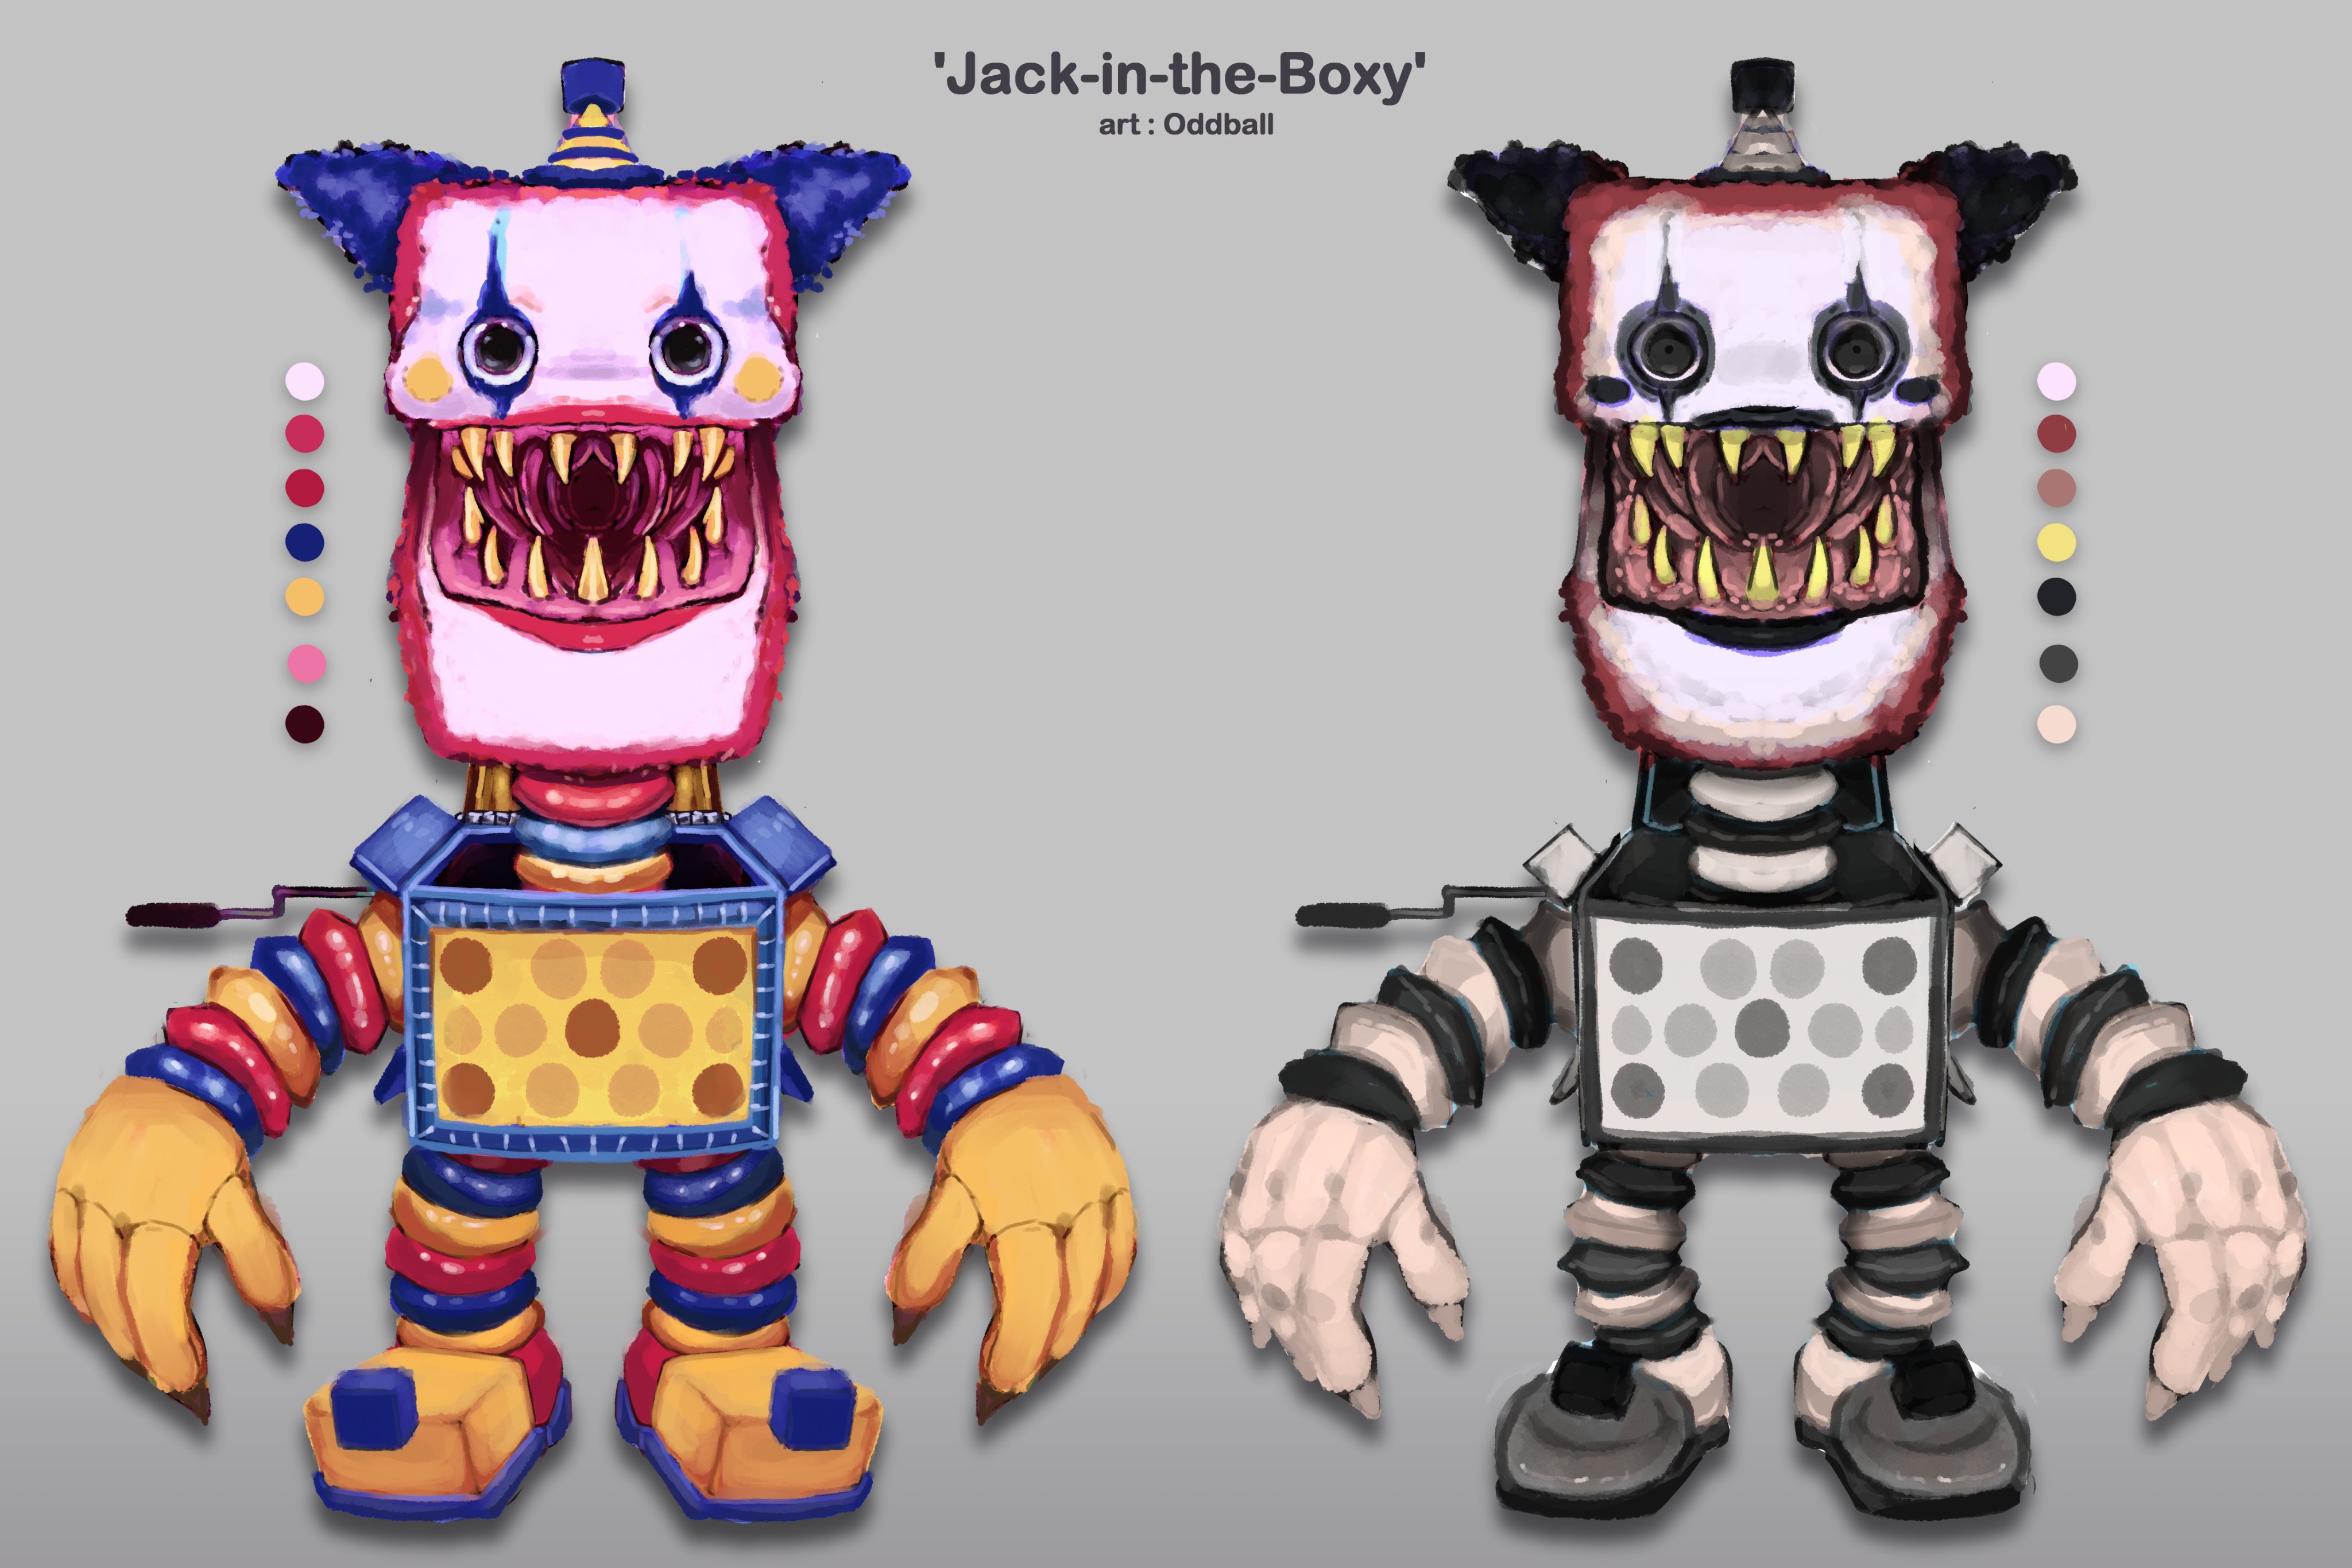 Oddball on X: 'Jack-in-the-Boxy' skin concept I designed! (fan-made) Love  the character designs from mob so I wanted to take a stab at a skin for Boxy -boo! #PoppyPlaytime #ProjectPlaytime  / X